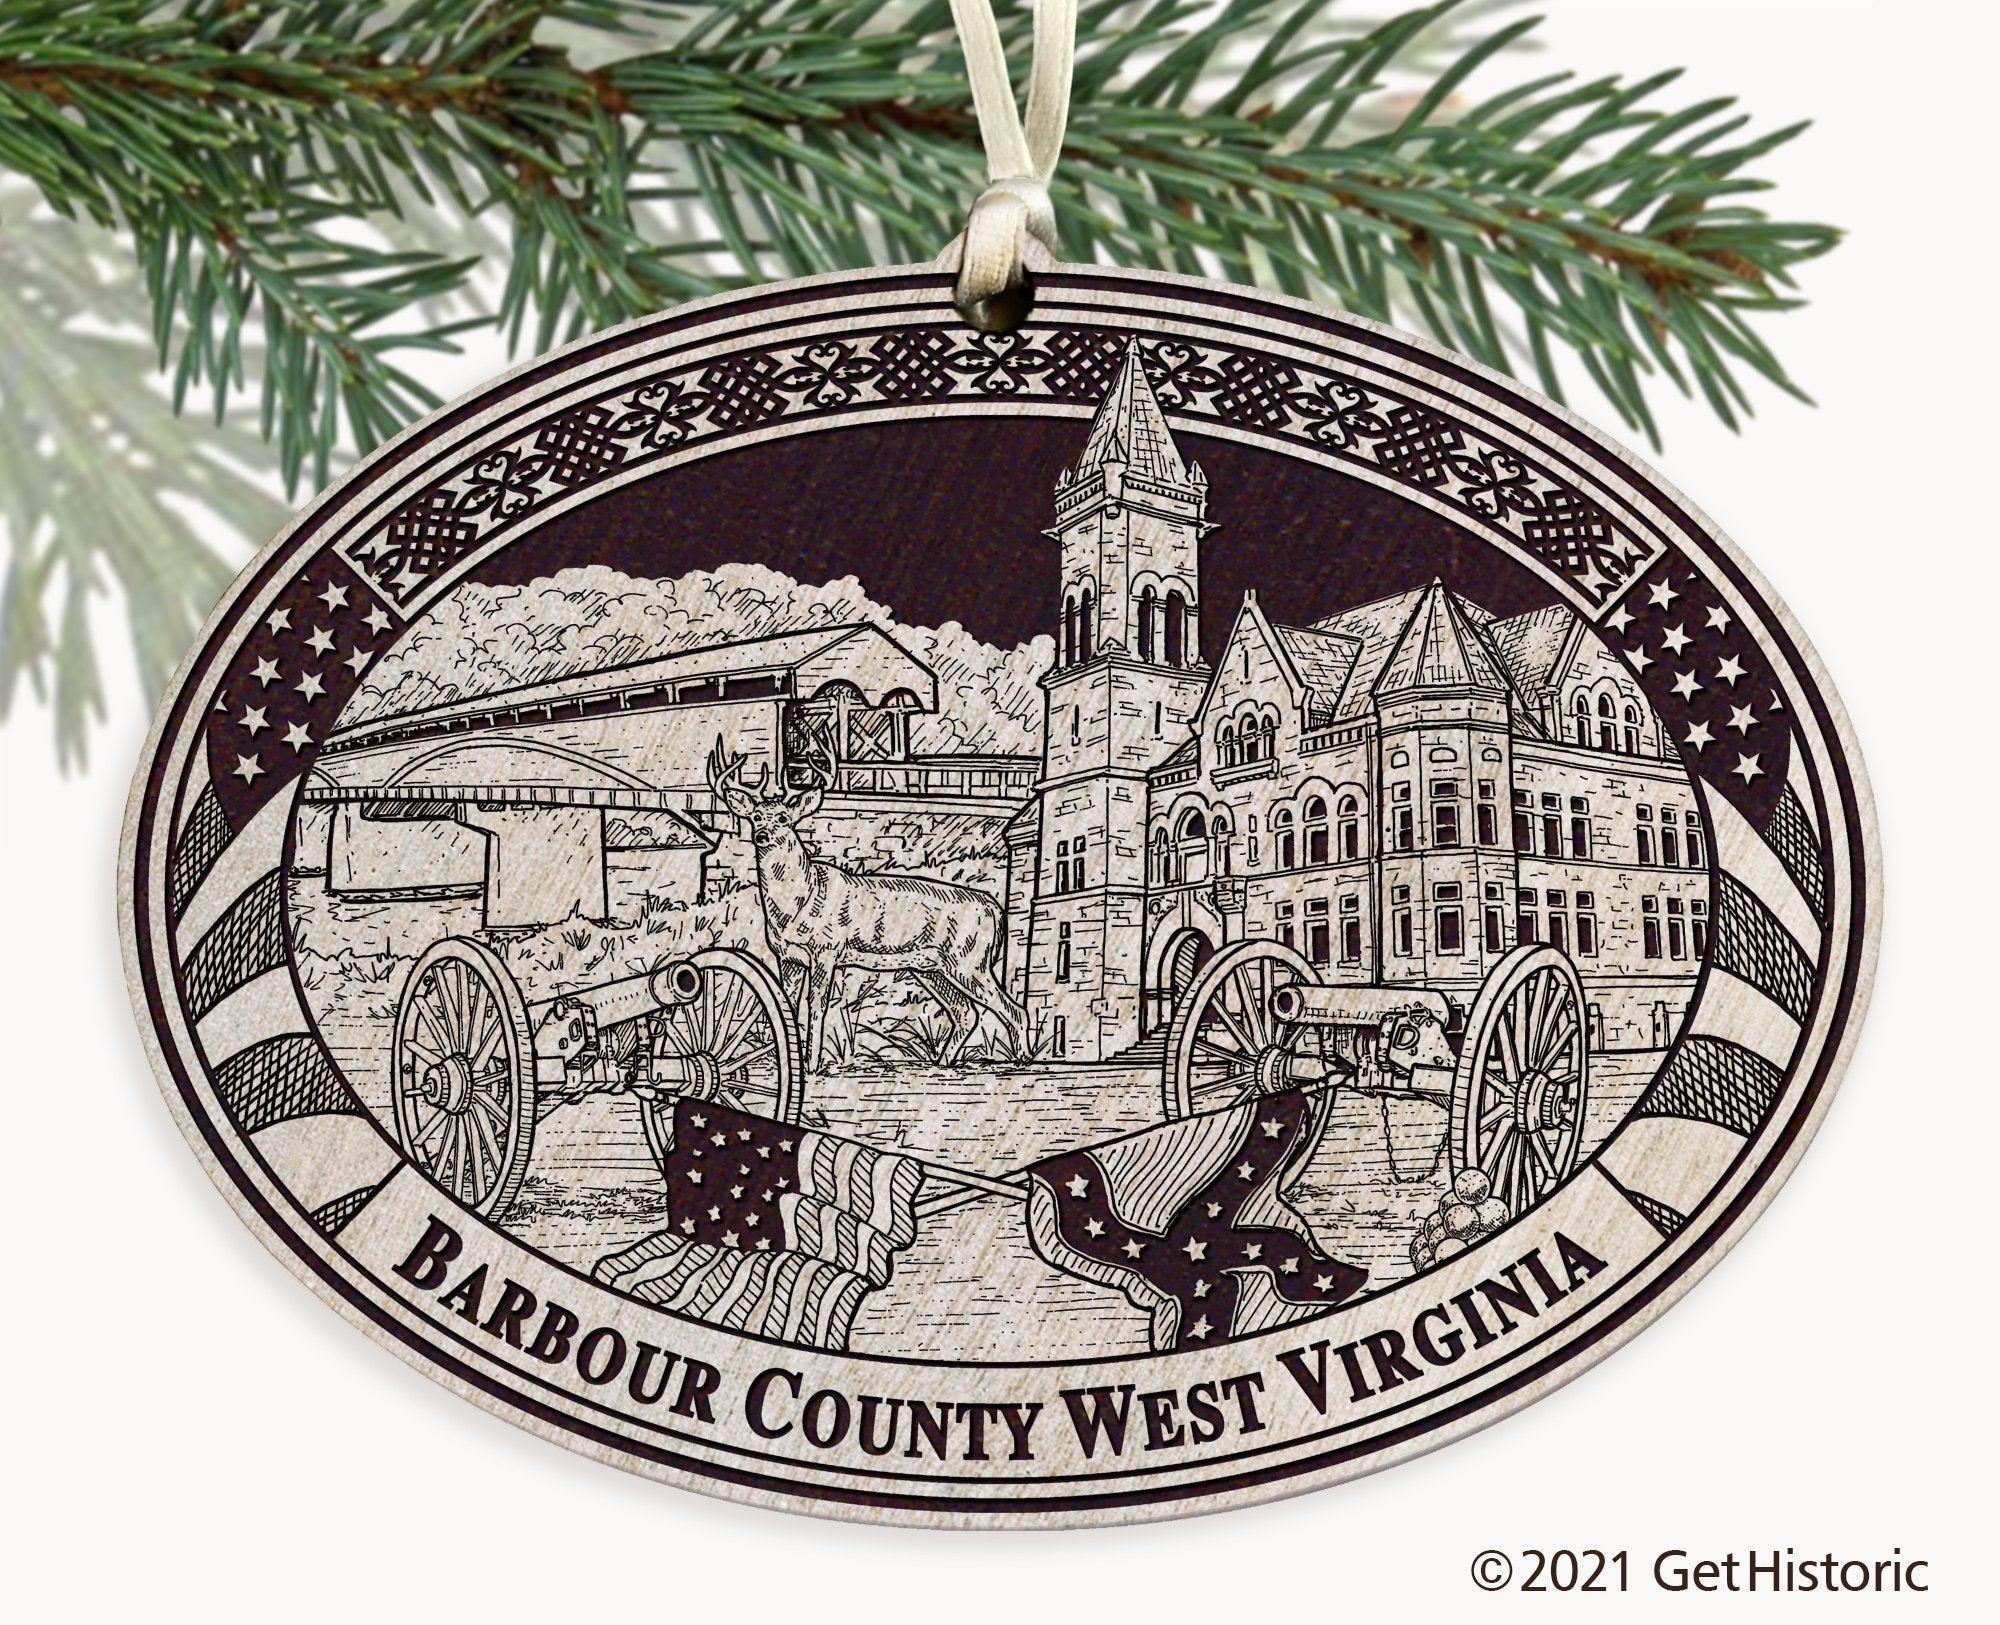 Barbour County West Virginia Engraved Ornament